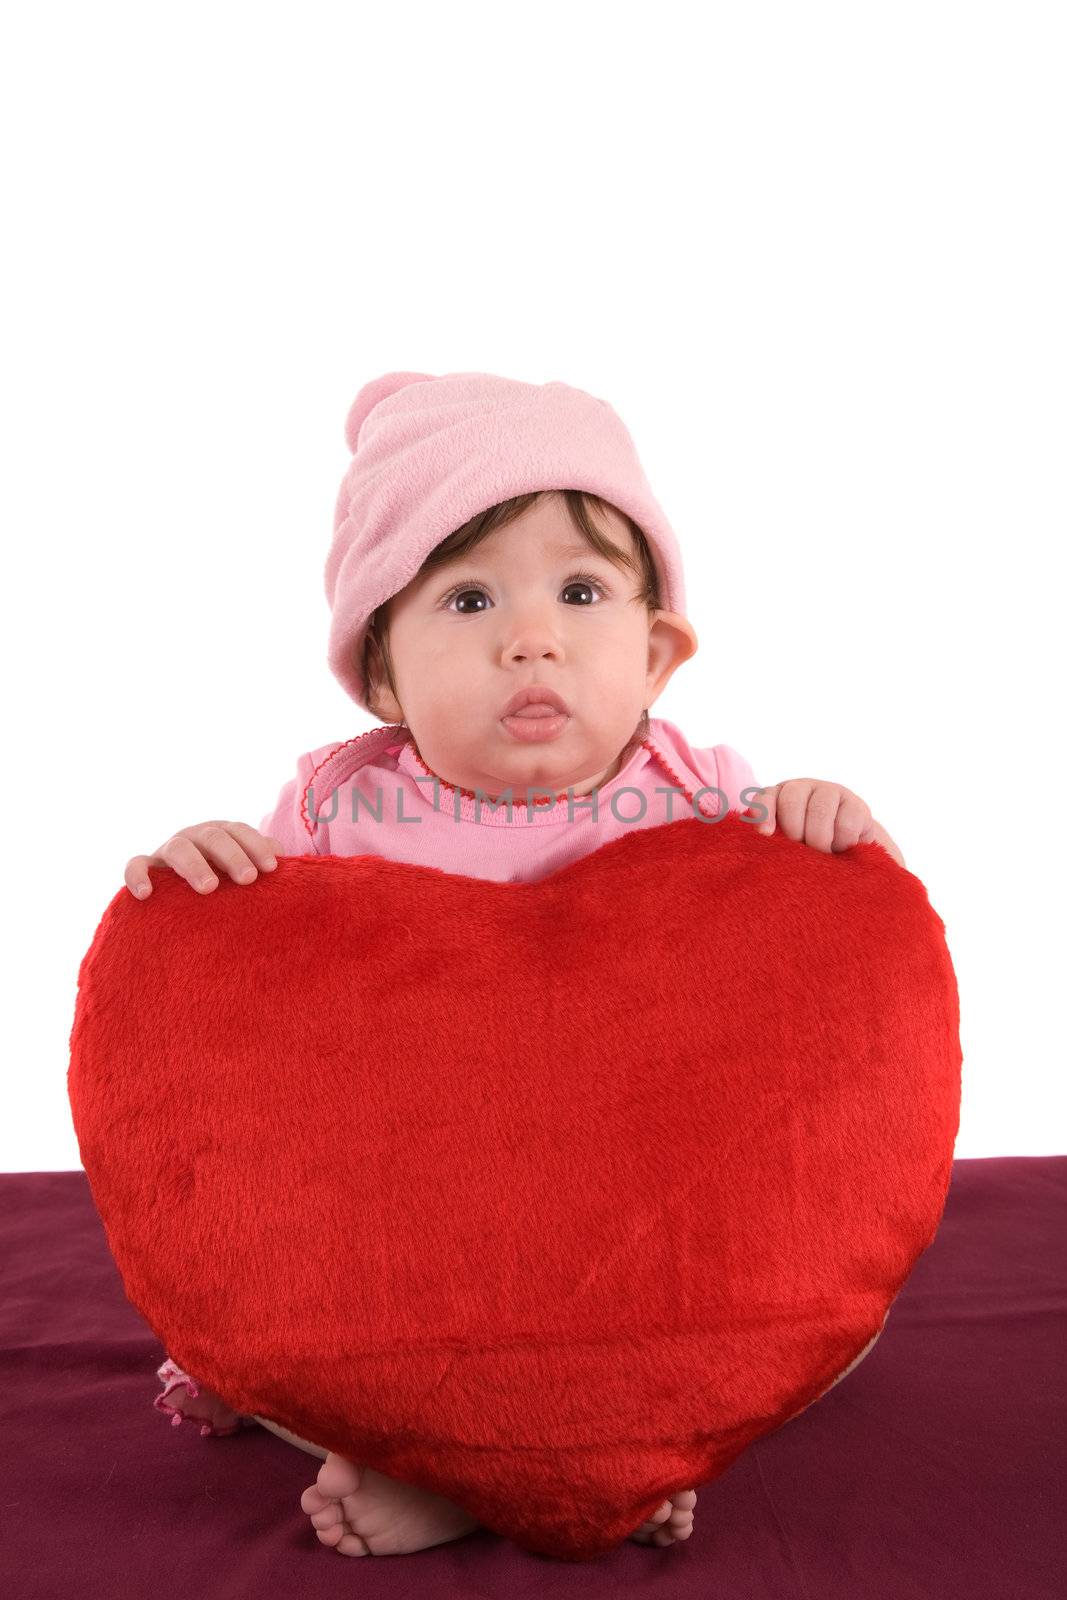 Cute little baby sitting with a big red pluche heart